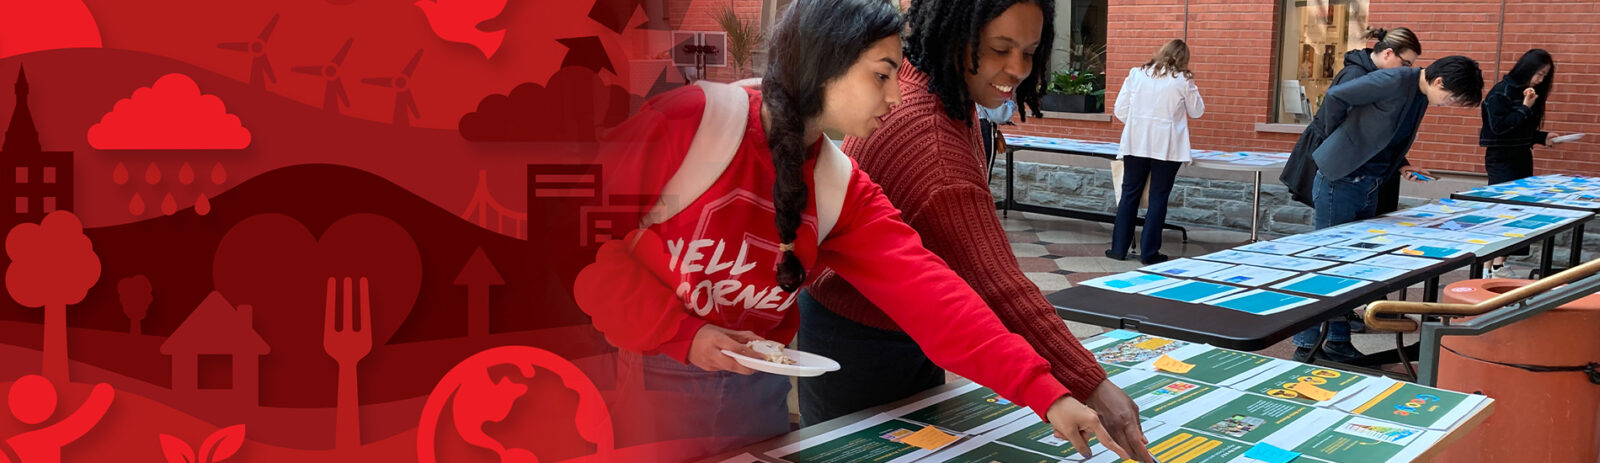 Hero banner with left side of image for decoration and right side is 2 female students pointing at a paper on a table outside.